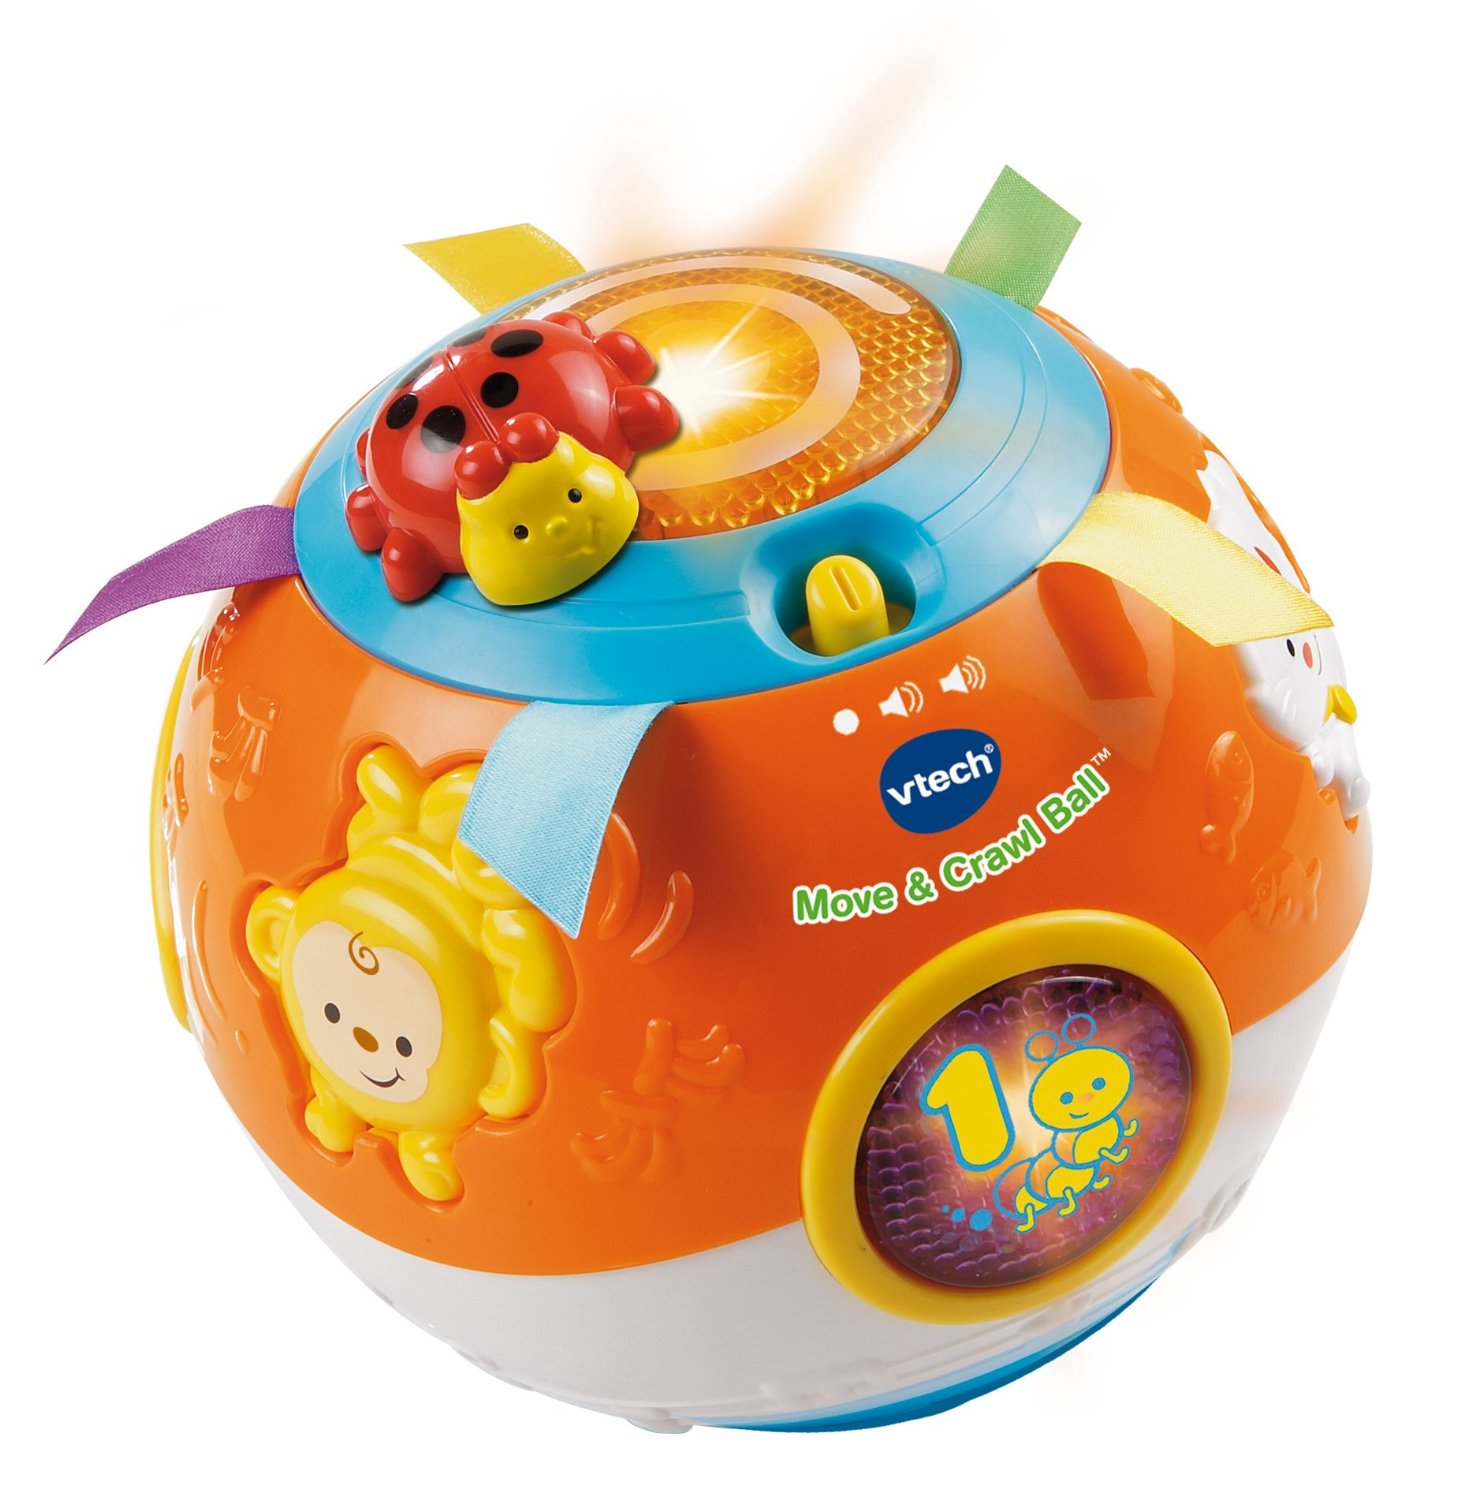 VTech Move and Crawl Ball Only $7.49 (Reg. $14.99)